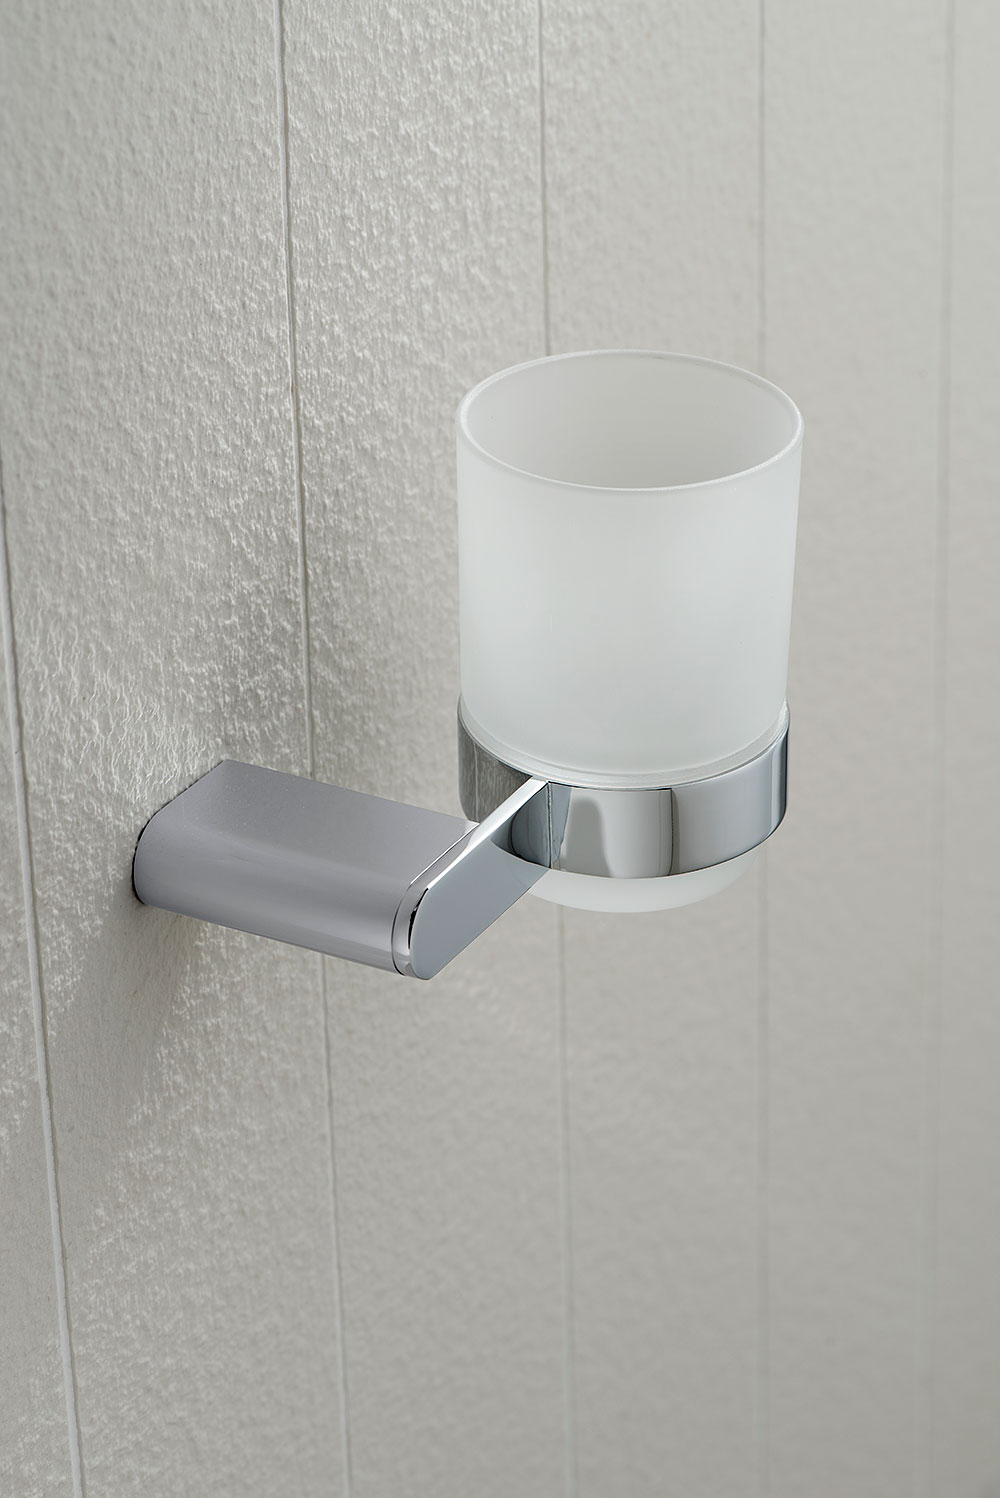 Modern frosted glass tumbler and chrome holder on a white linear pattern wall.